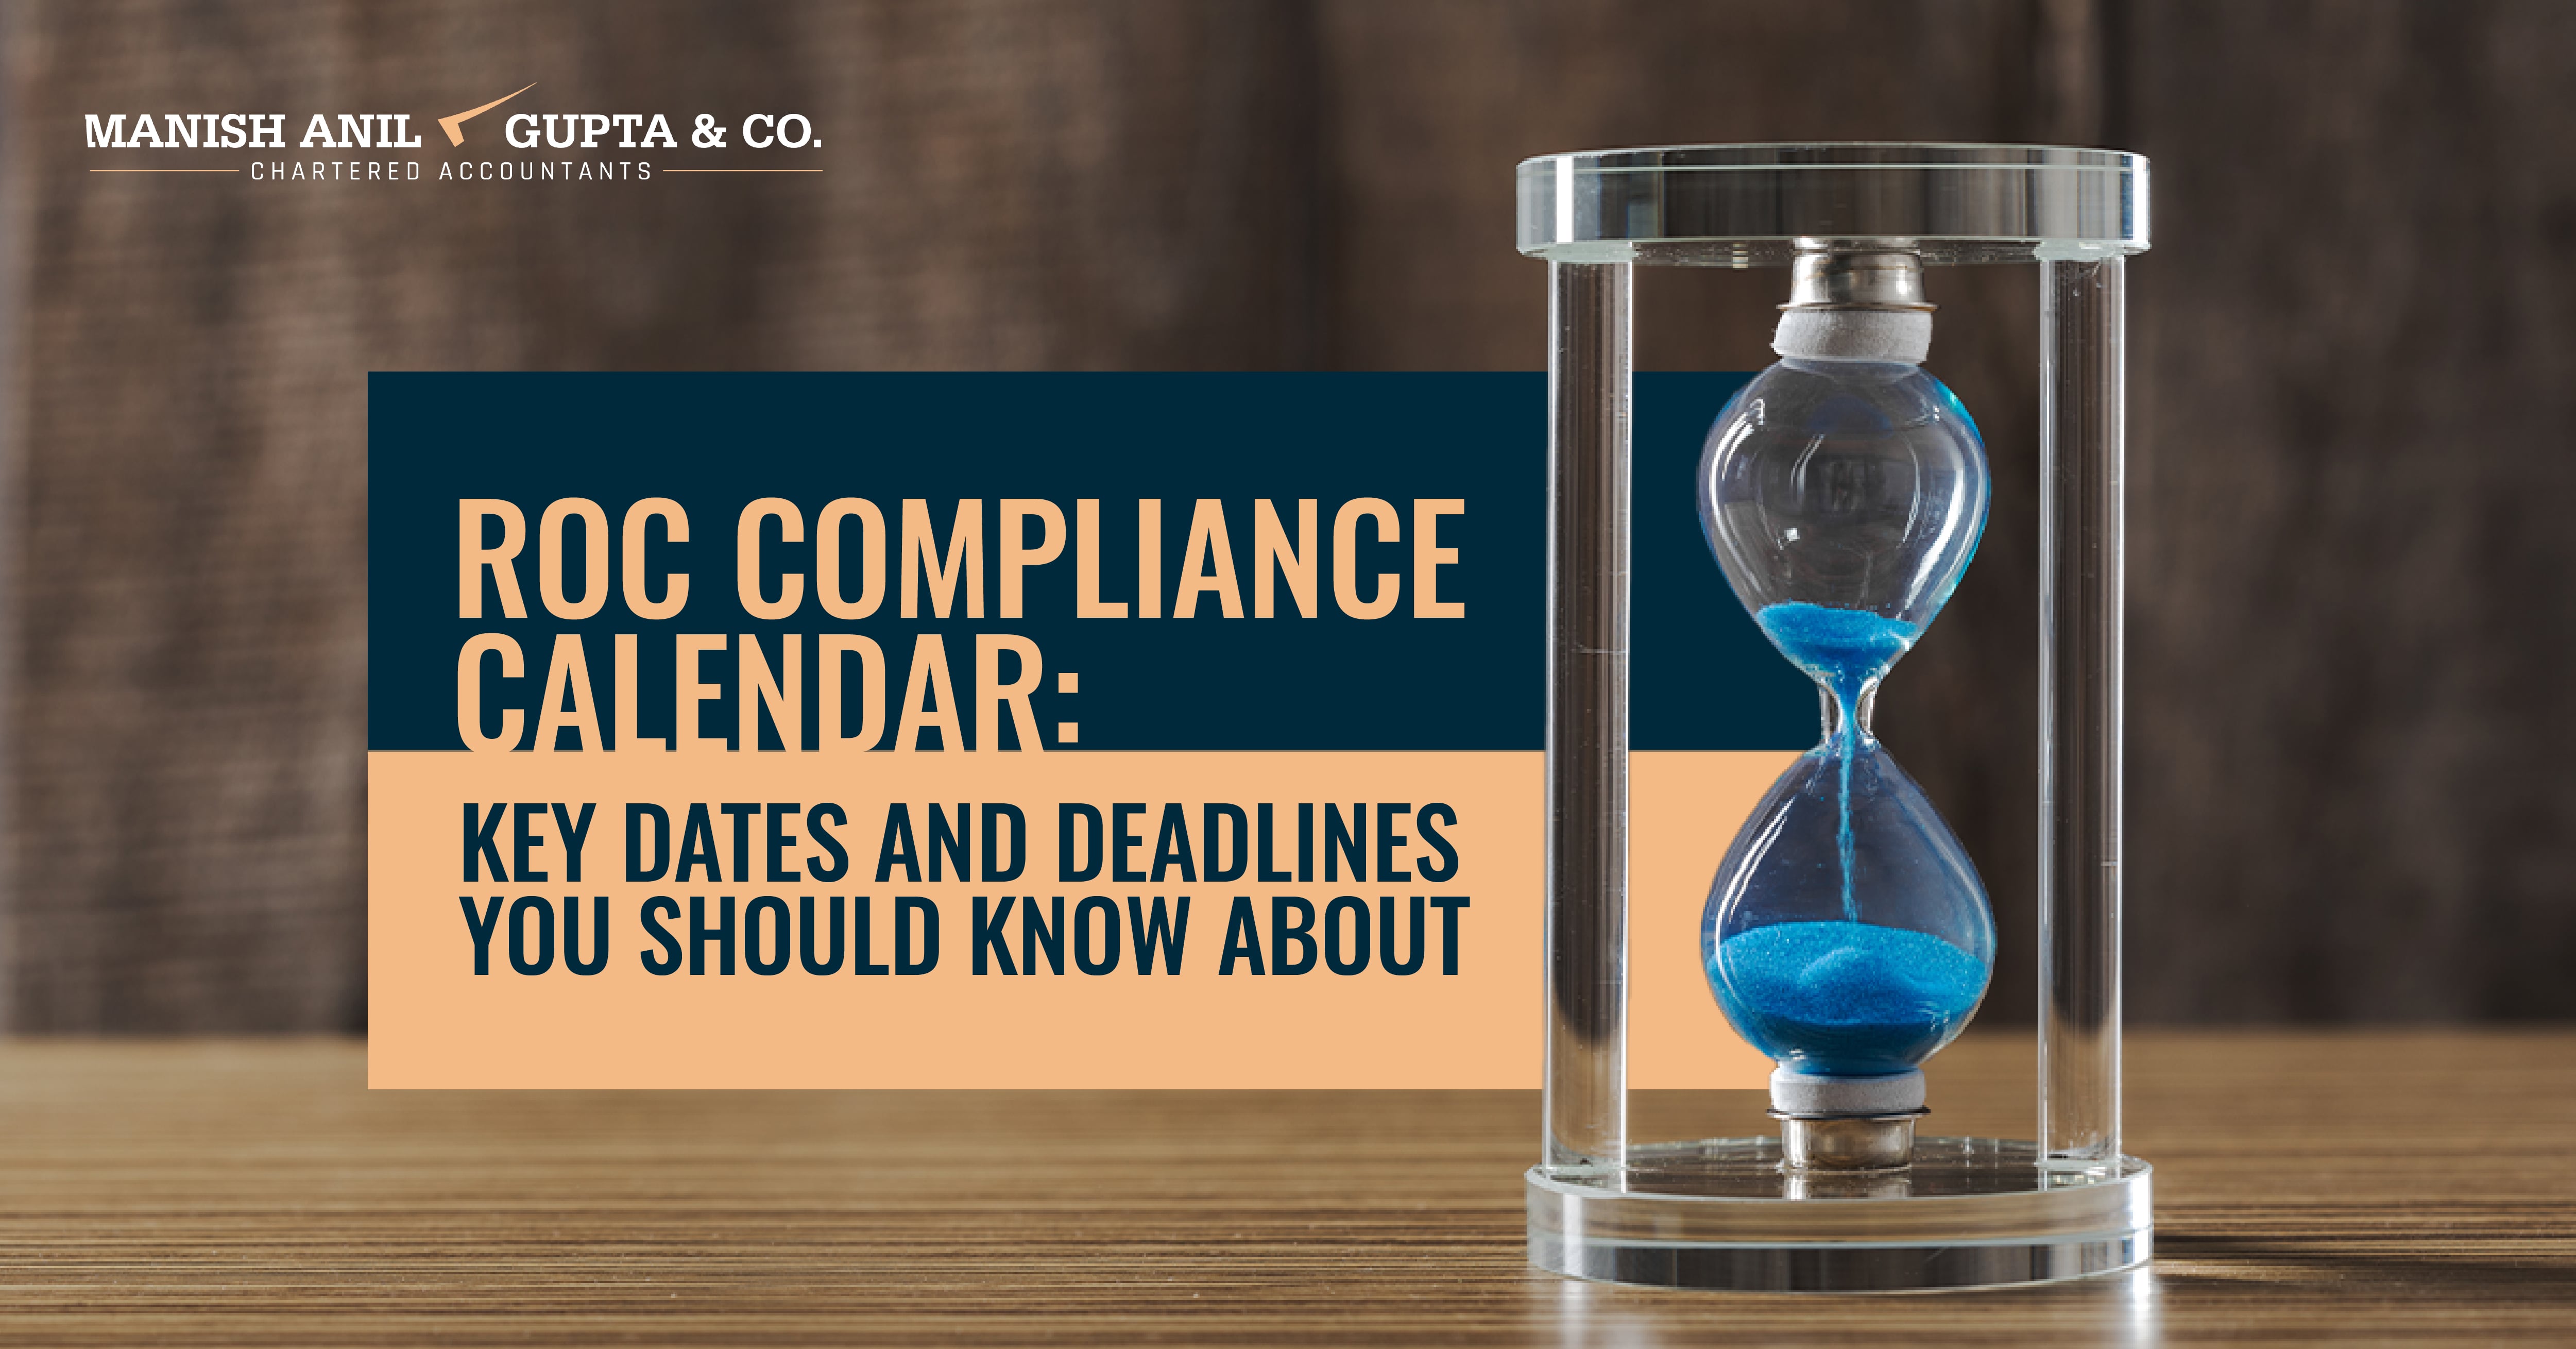 ROC Compliance Calendar: Key Dates and Deadlines  You Should Know About